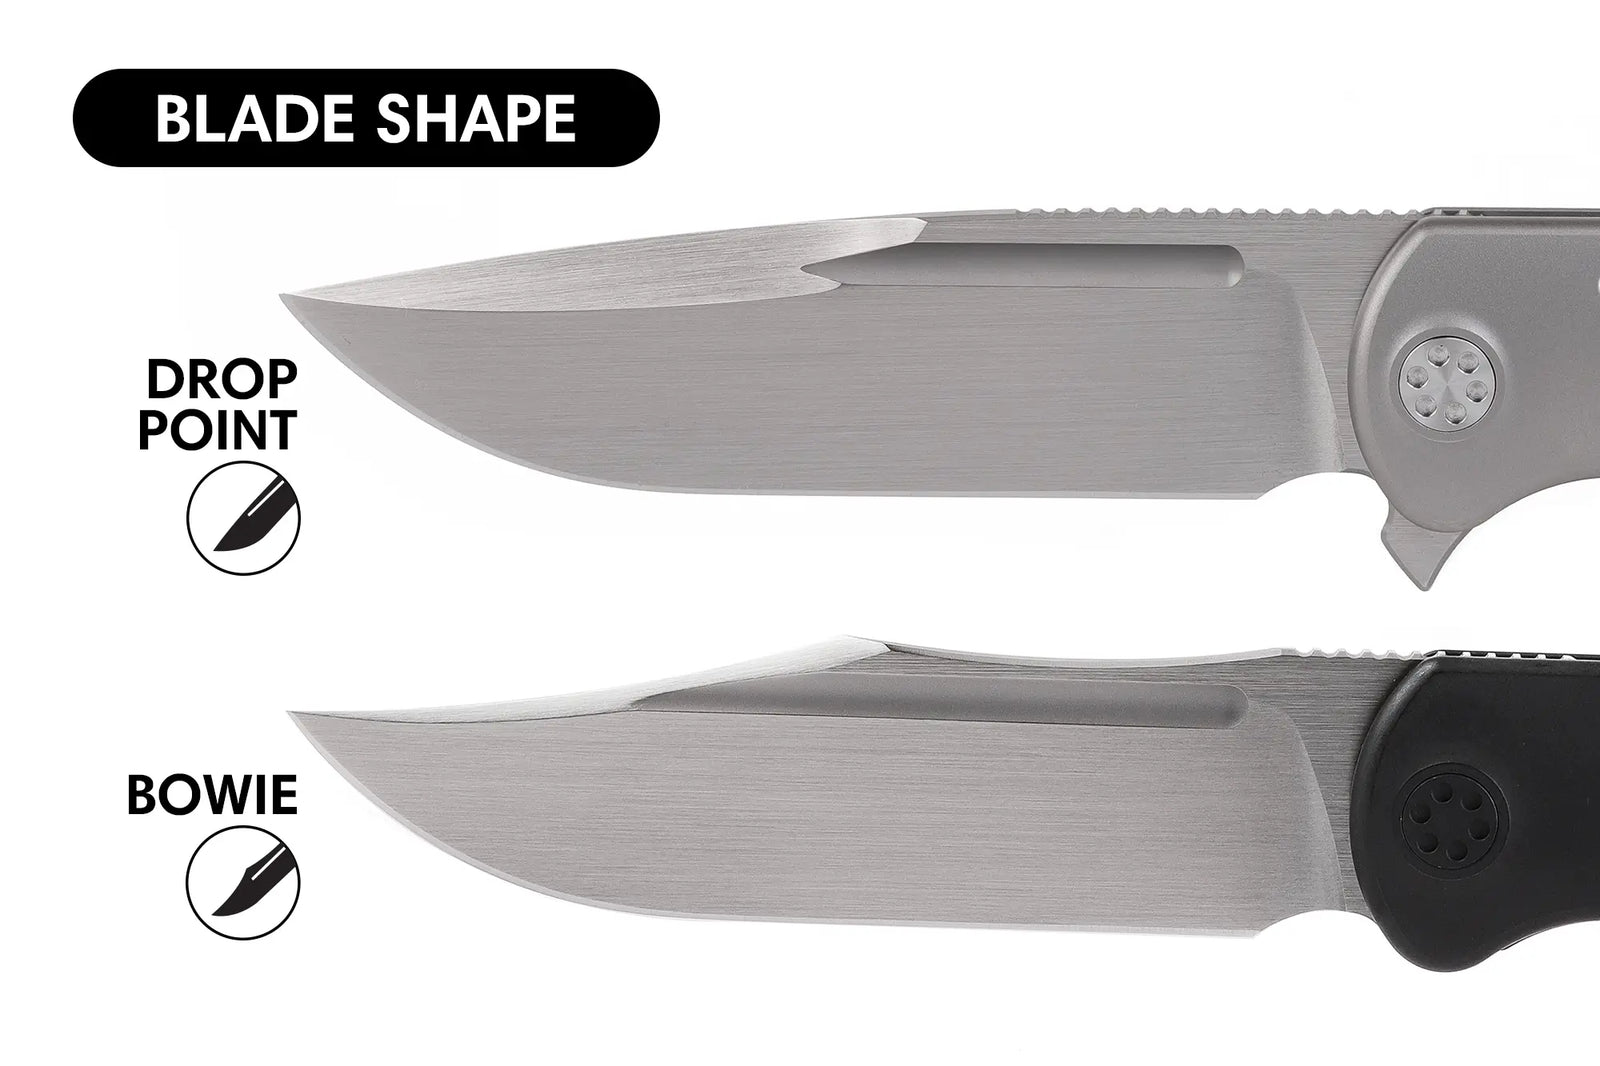 Kaviso X Sharp by Design Mini Tempest S90V Folding Knife with Drop Point or Bowie Blade Shape